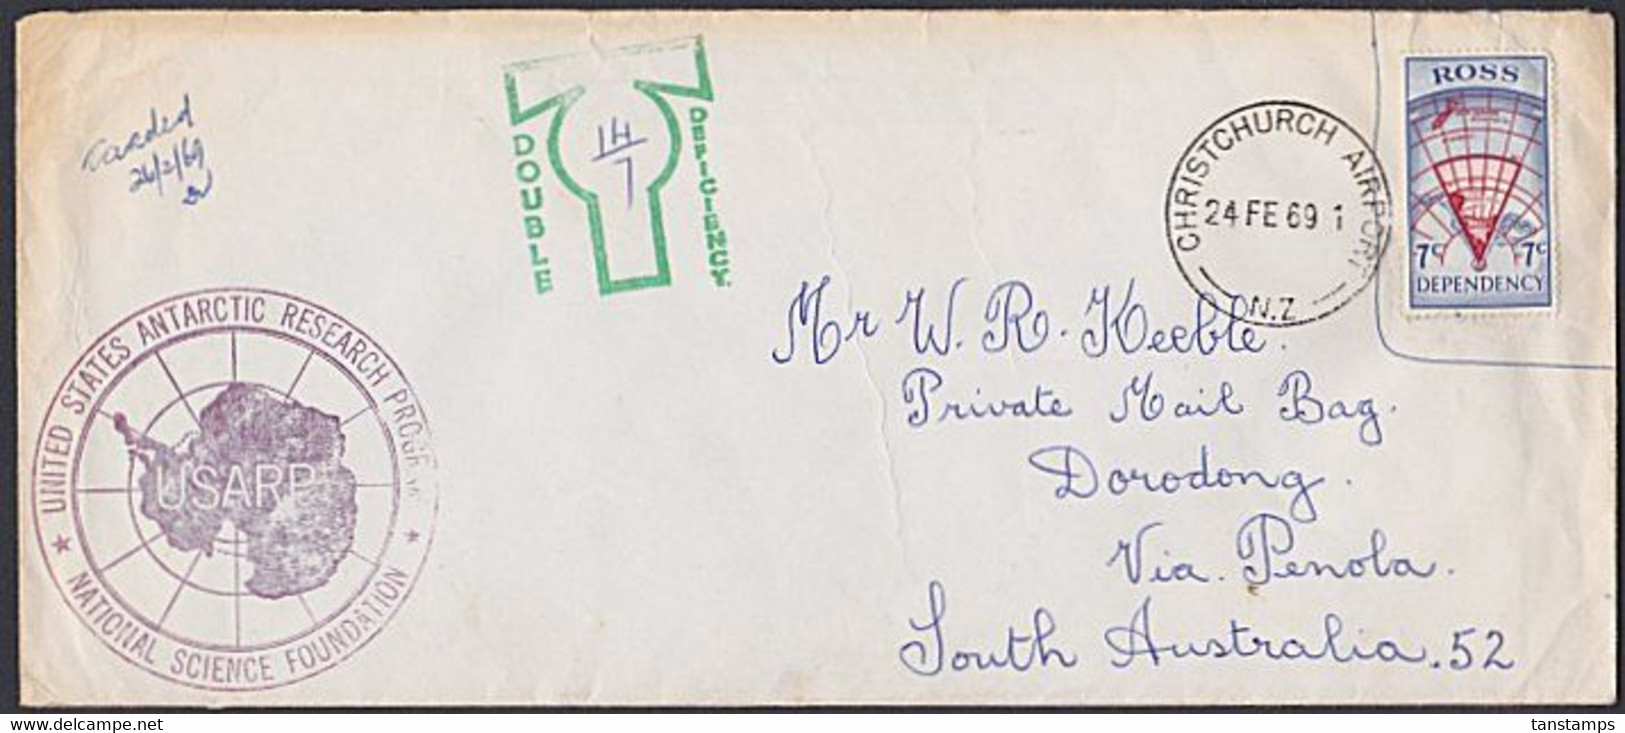 ROSS DEPENDENCY - SOUTH AUSTRALIA DOUBLE DEFICIENCY USARP CACHET - Covers & Documents